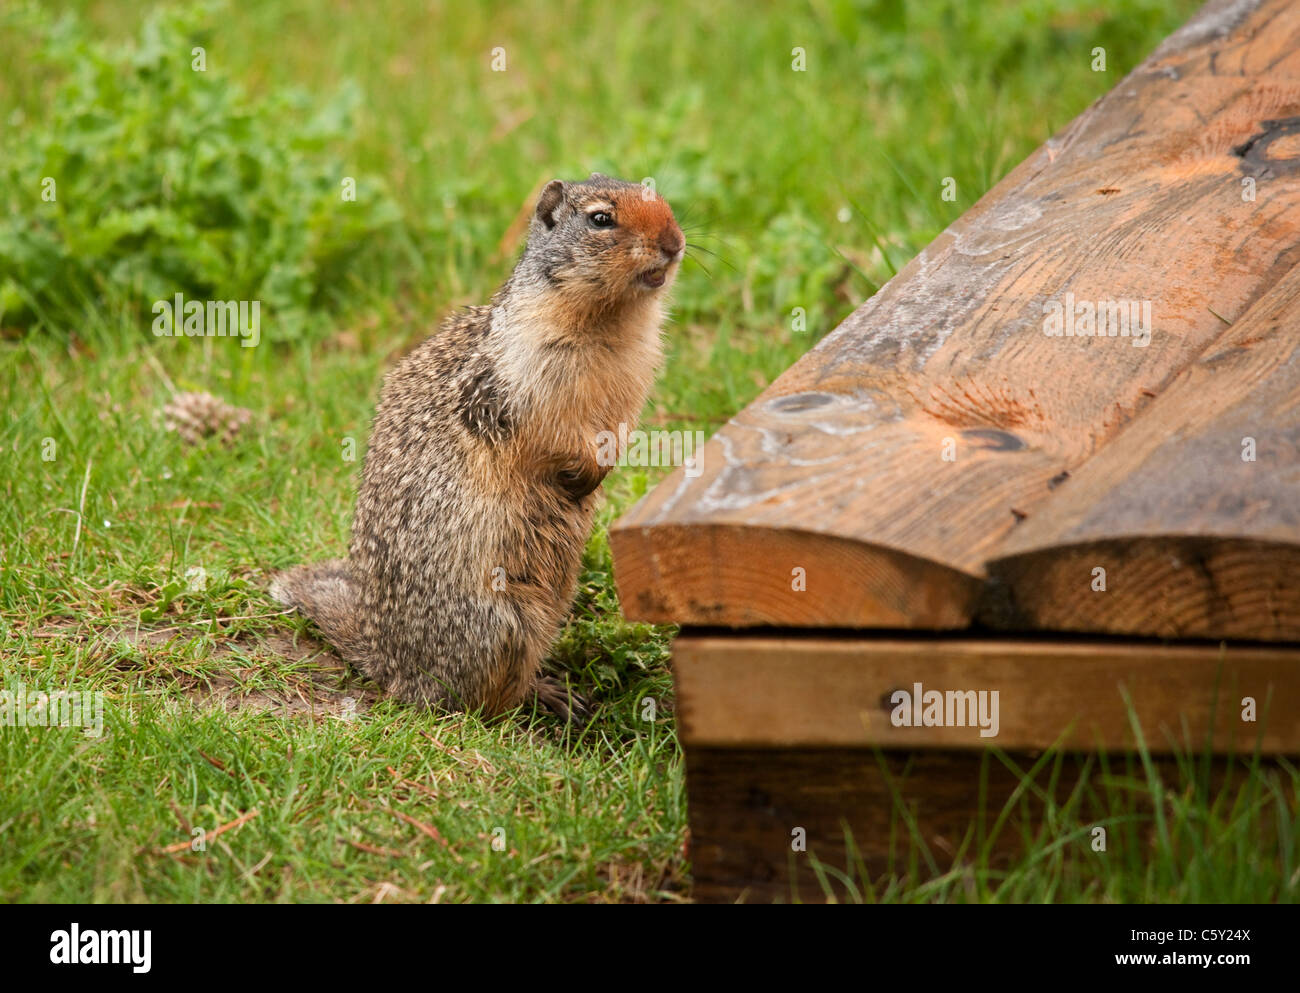 A long shot of a ground squirrel or gopher chirping noisily in a picnic area. Stock Photo